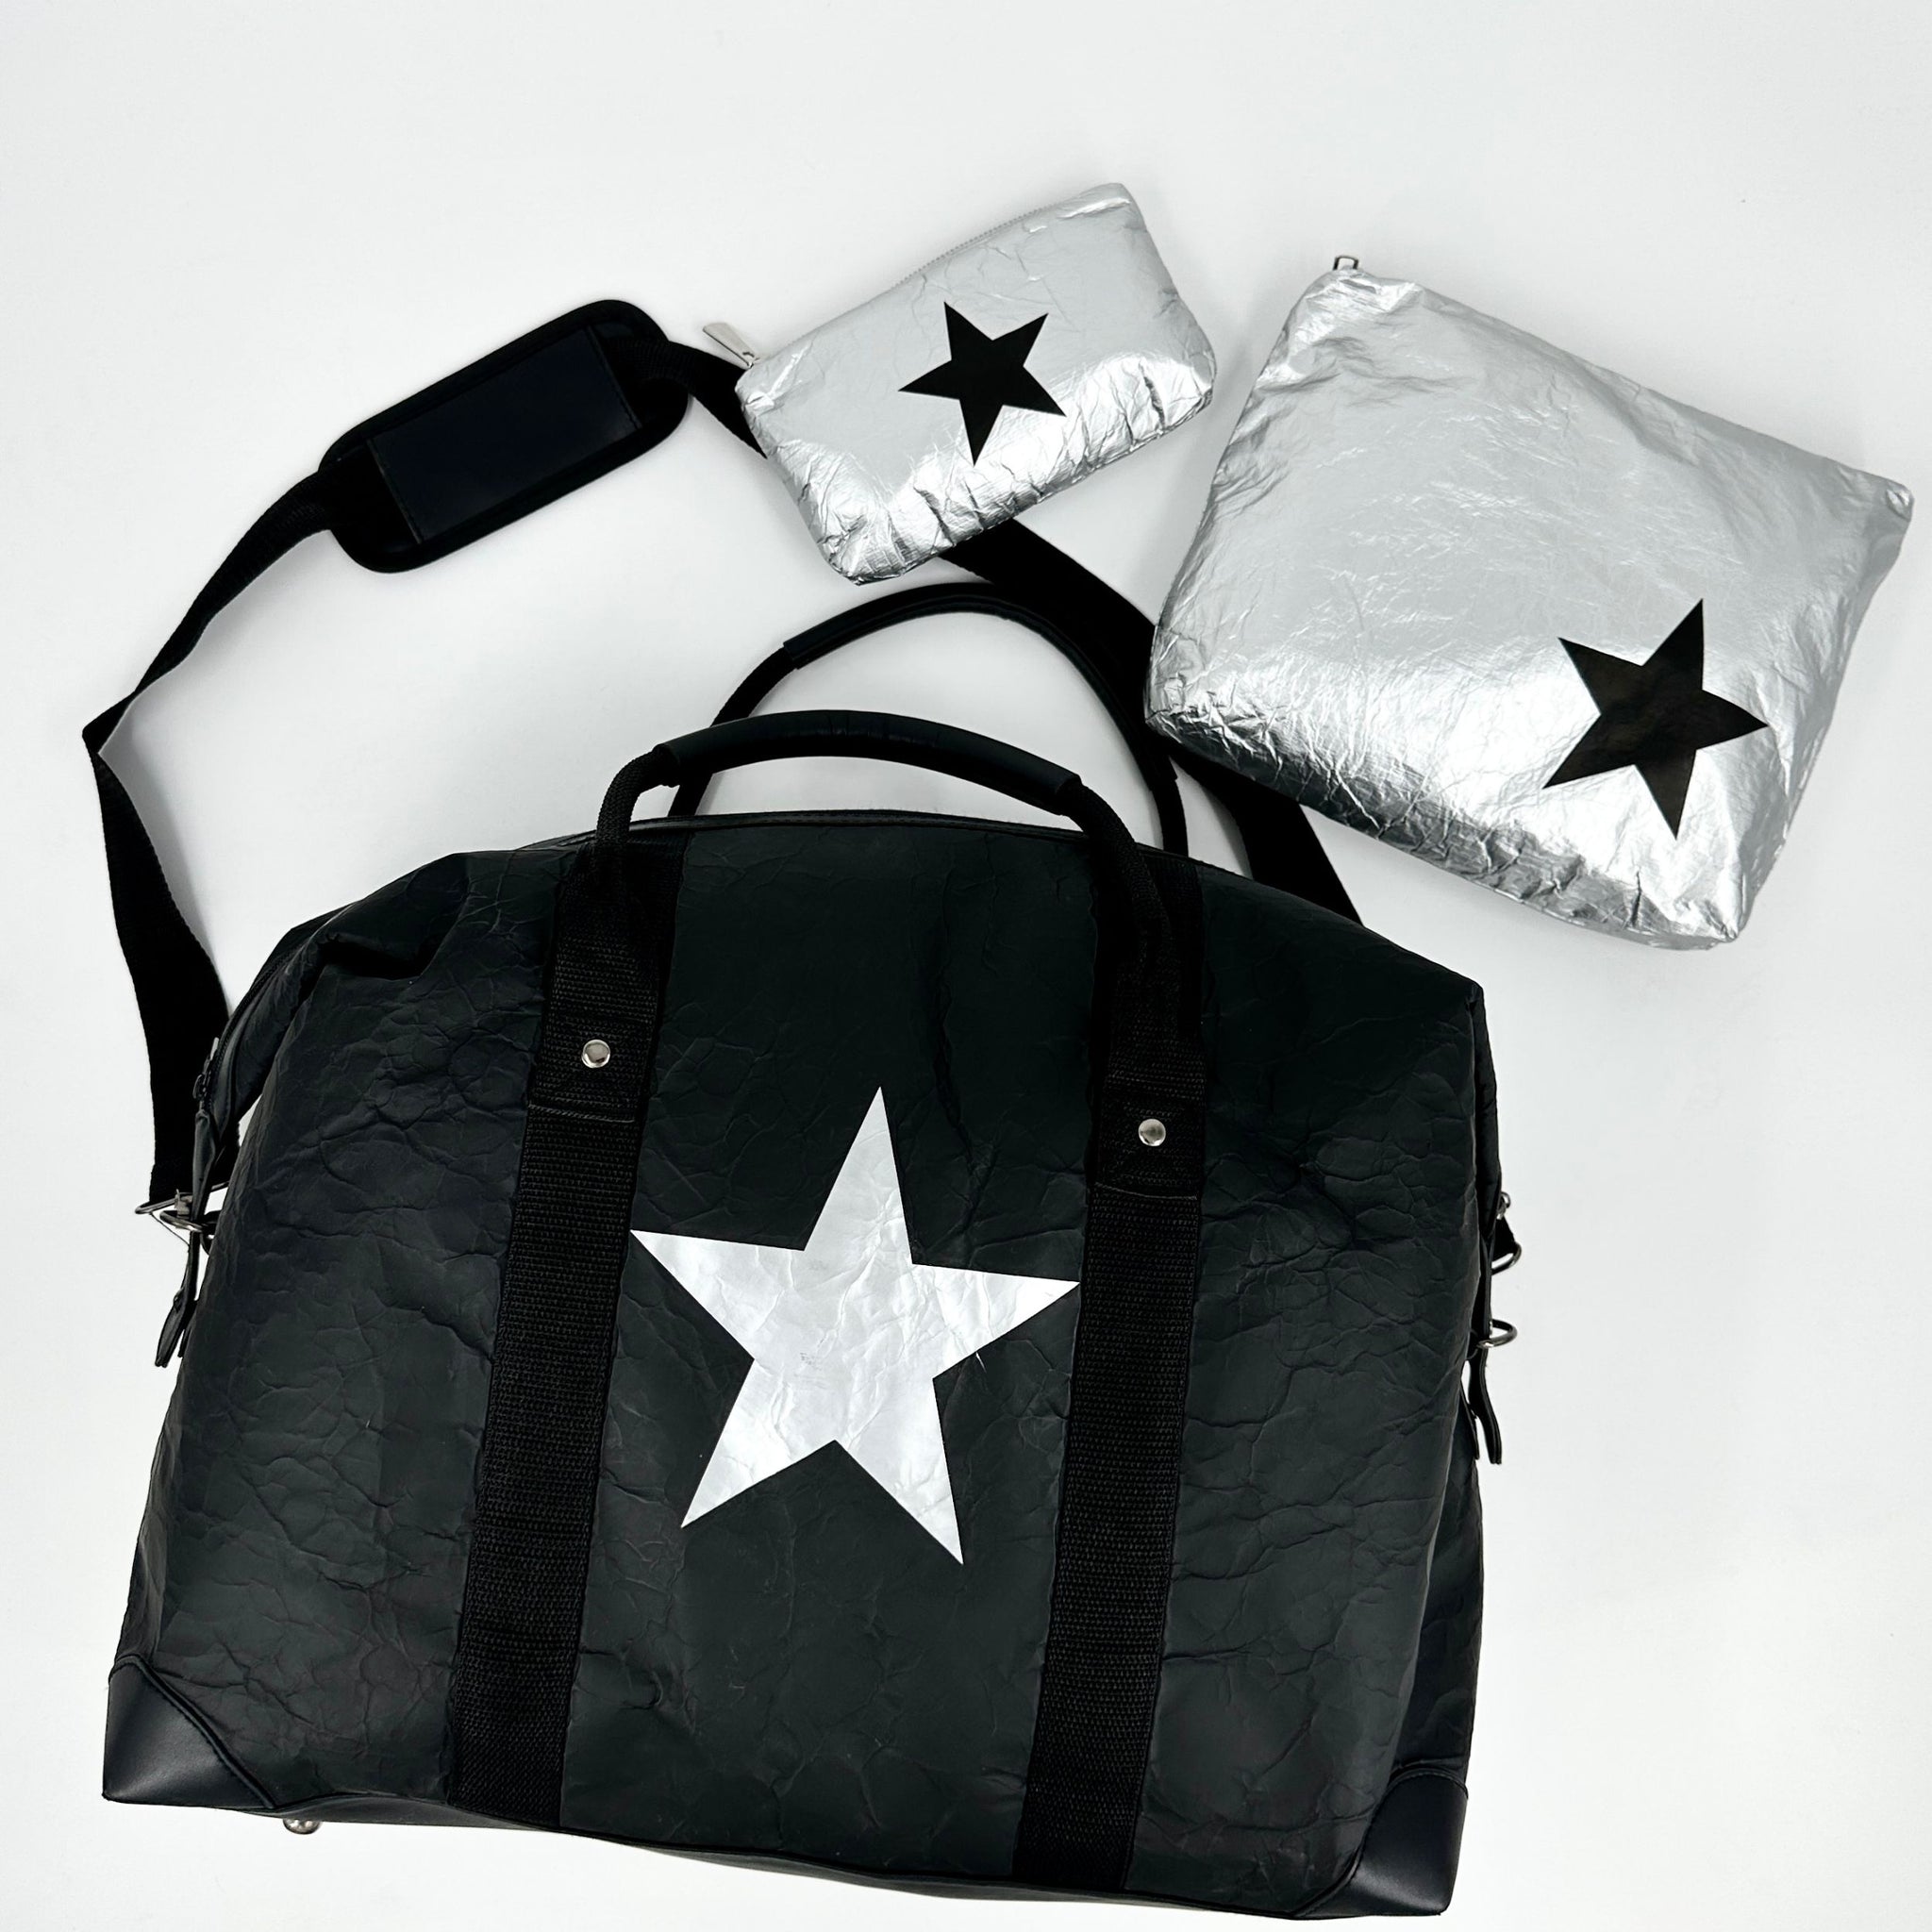 The Weekender Set of Five Travel Bags - Black and Silver with Stars